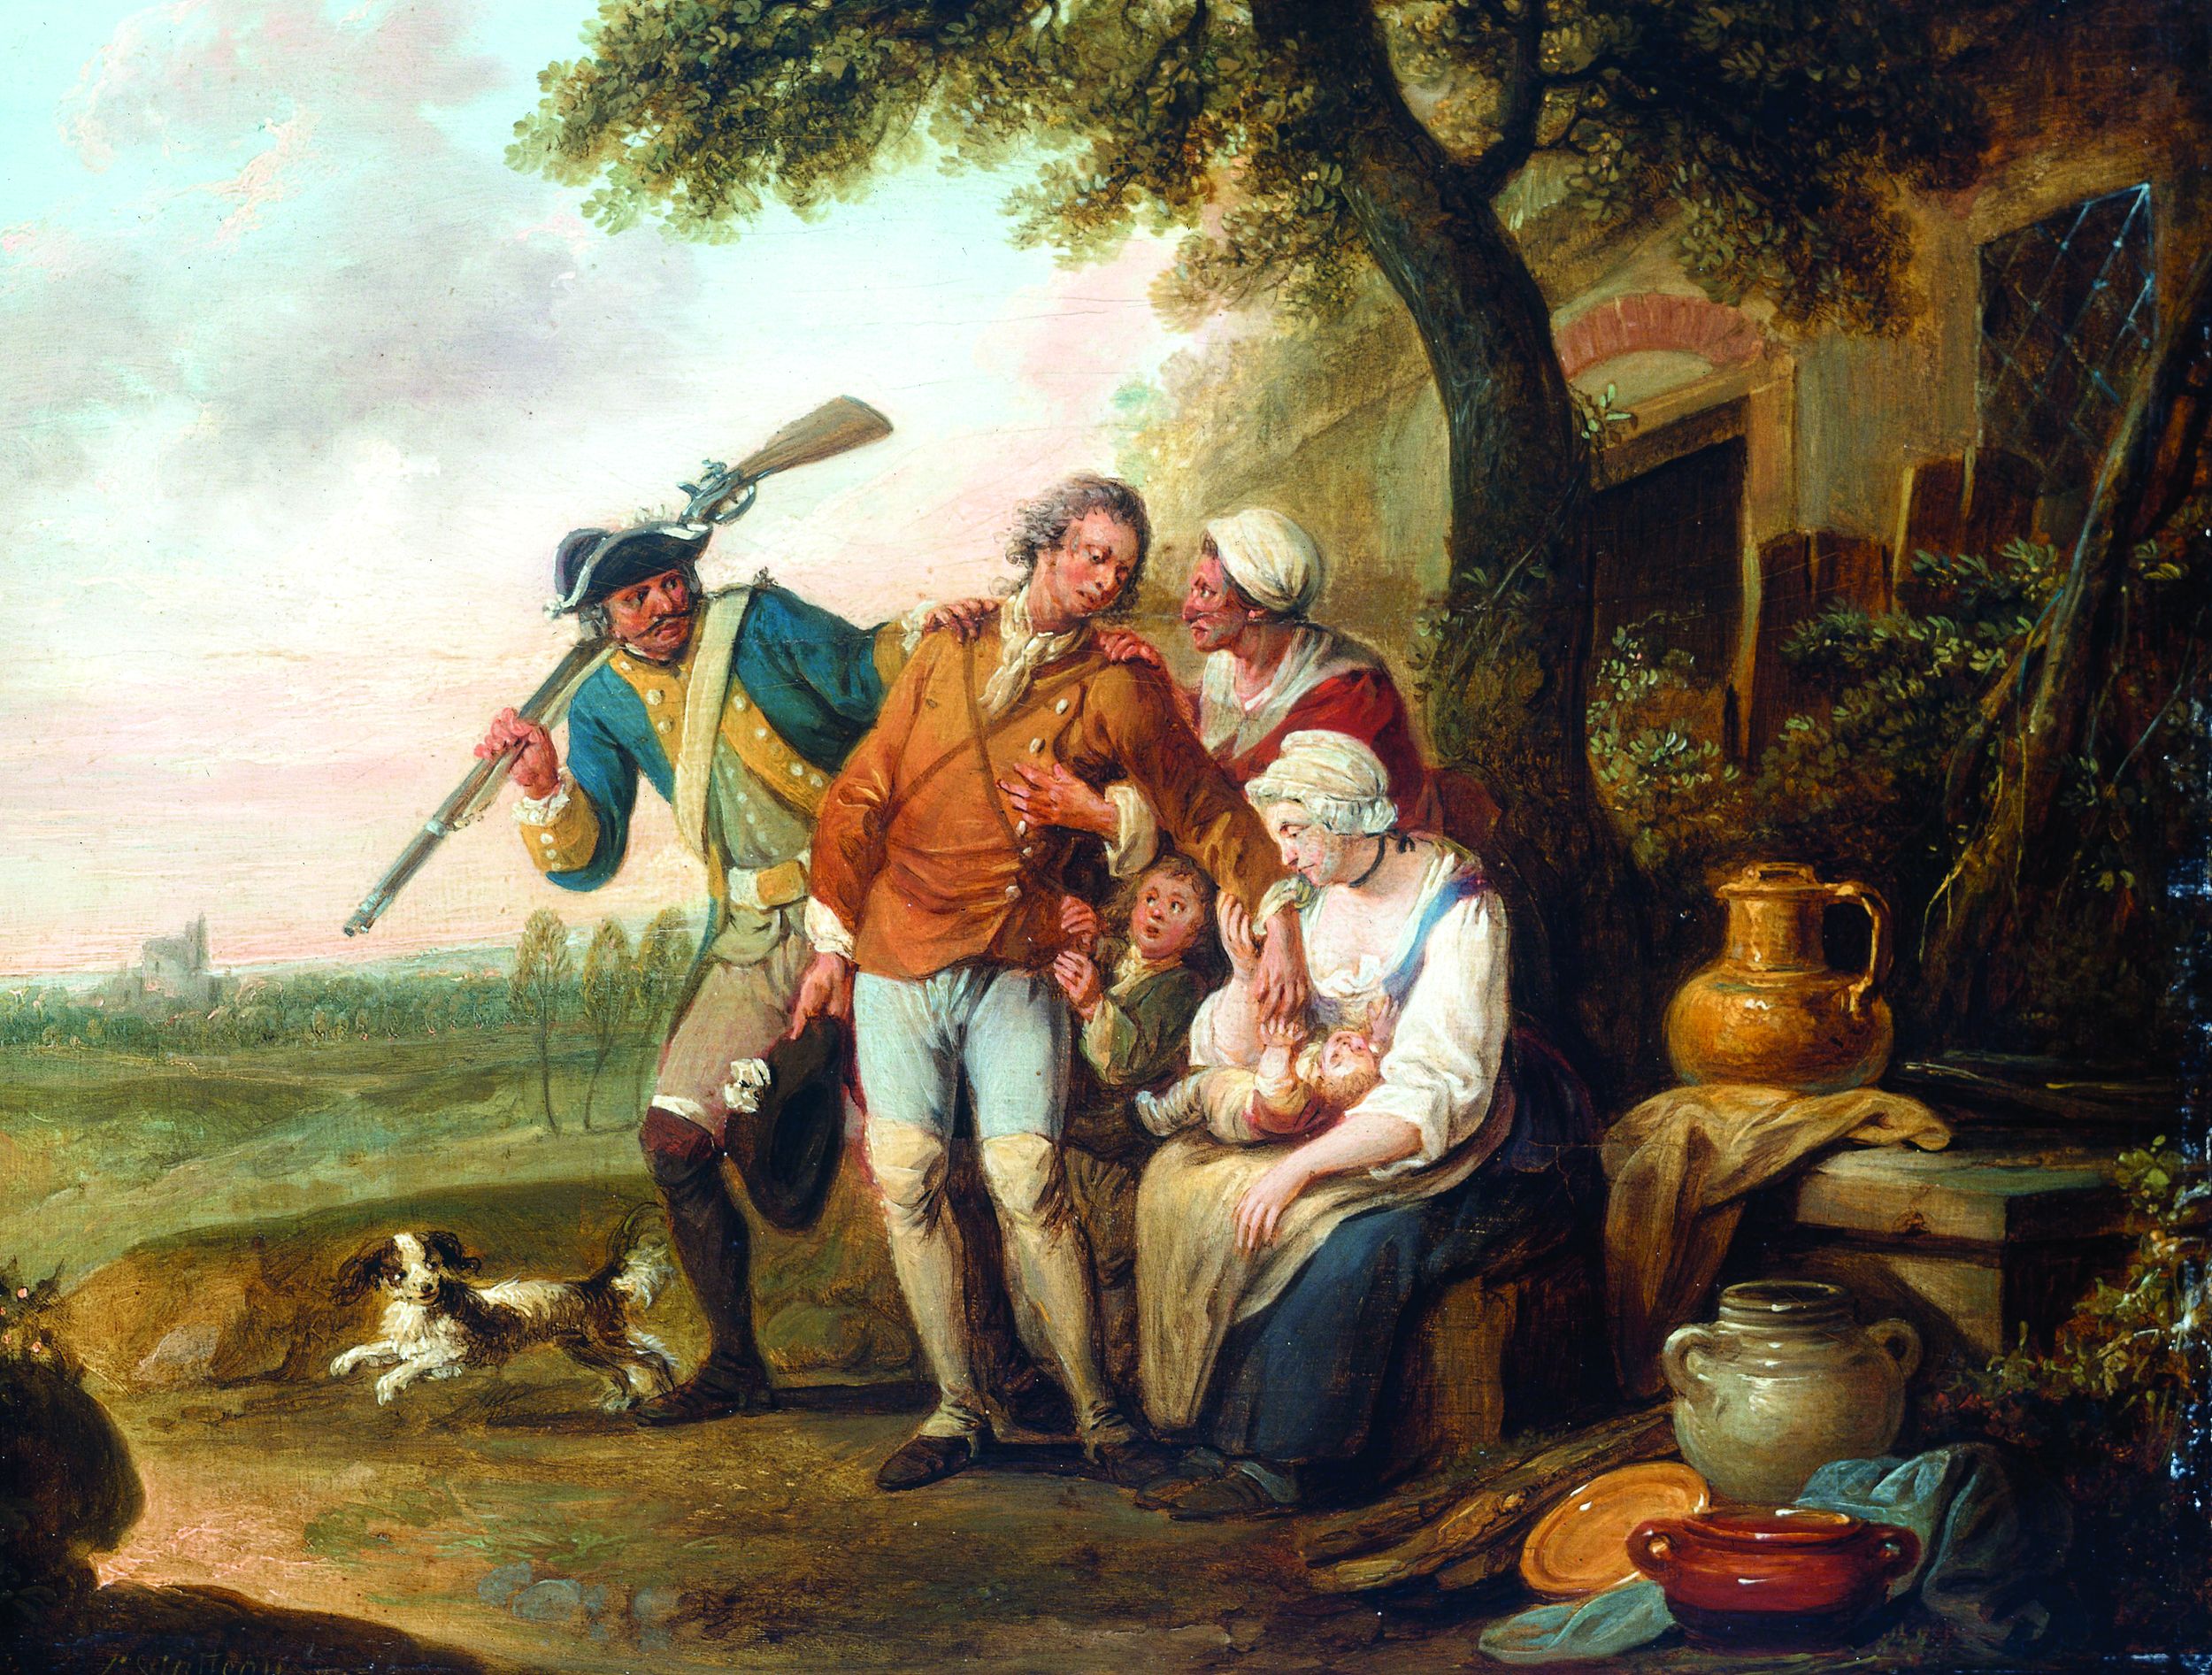 A hard-bitten Prussian recruiting officer dragoons a reluctant peasant into the service in Louis Joseph Watteau’s 1770 painting, The Unwilling Recruit.